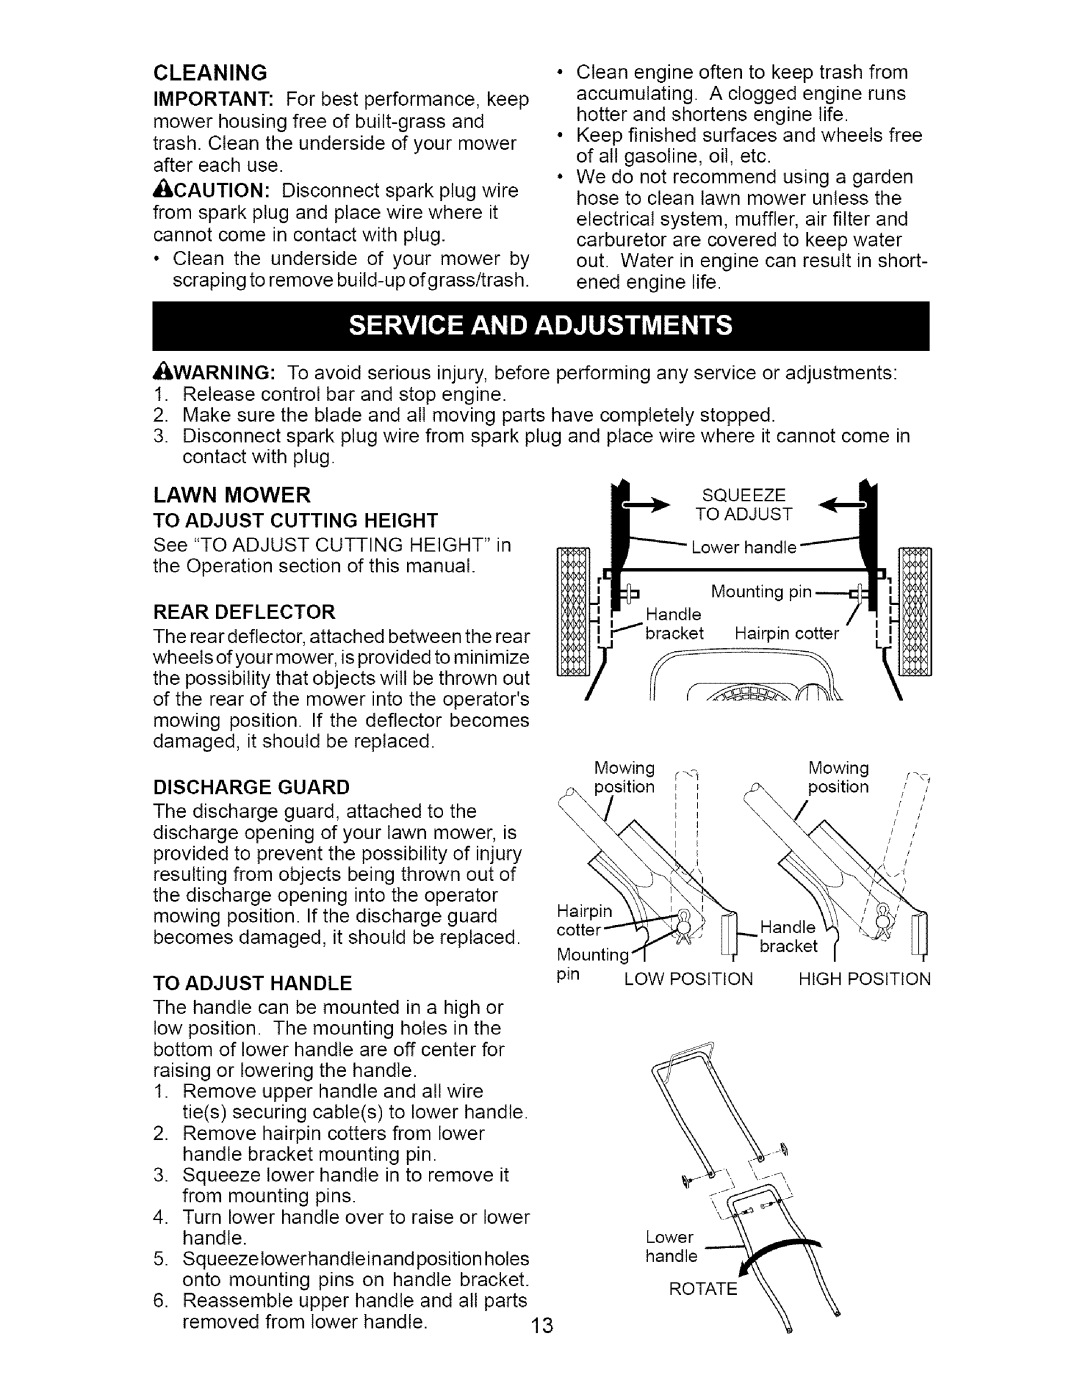 Craftsman 917.385122 manual Cleaning, Lawn Mower To Adjust Cutting Height, To Adjust Handle 